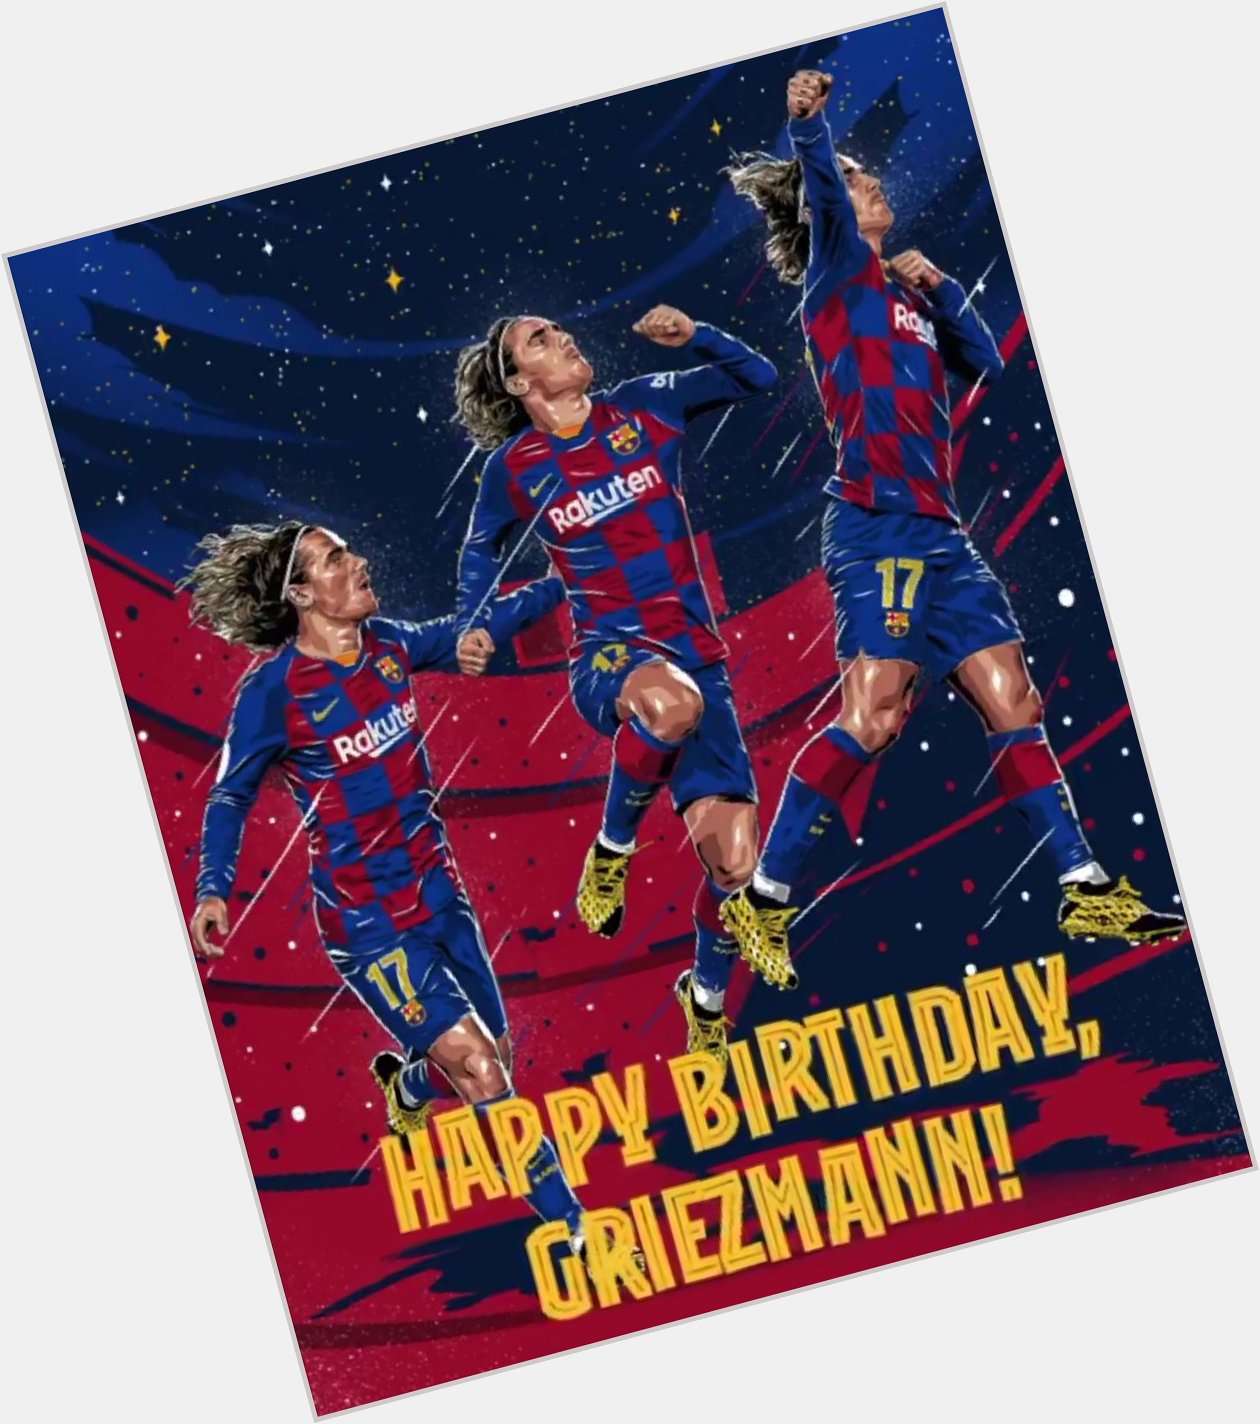 Happy birthday to Antoine Griezmann and Jordi Alba who turn 29 and 31 today! 